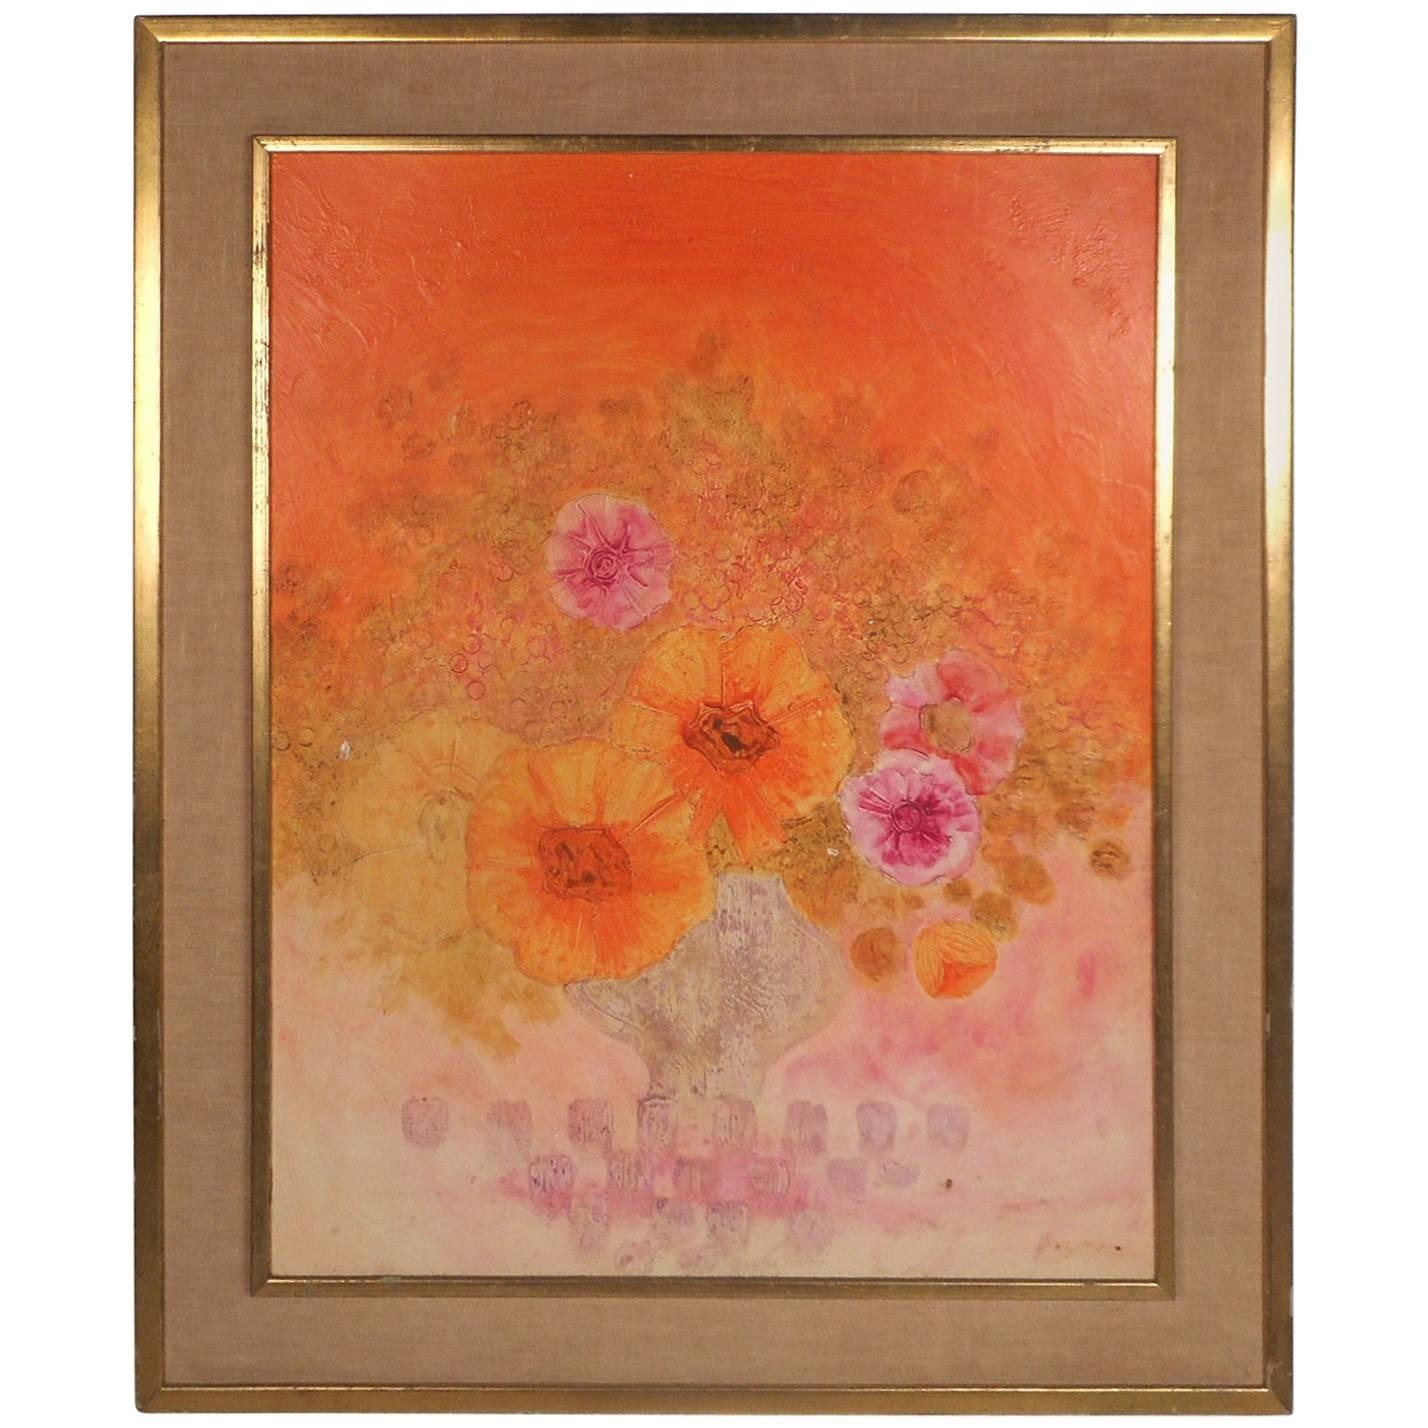 Gorgeous Floral Abstract Oil Painting Signed by the Artist